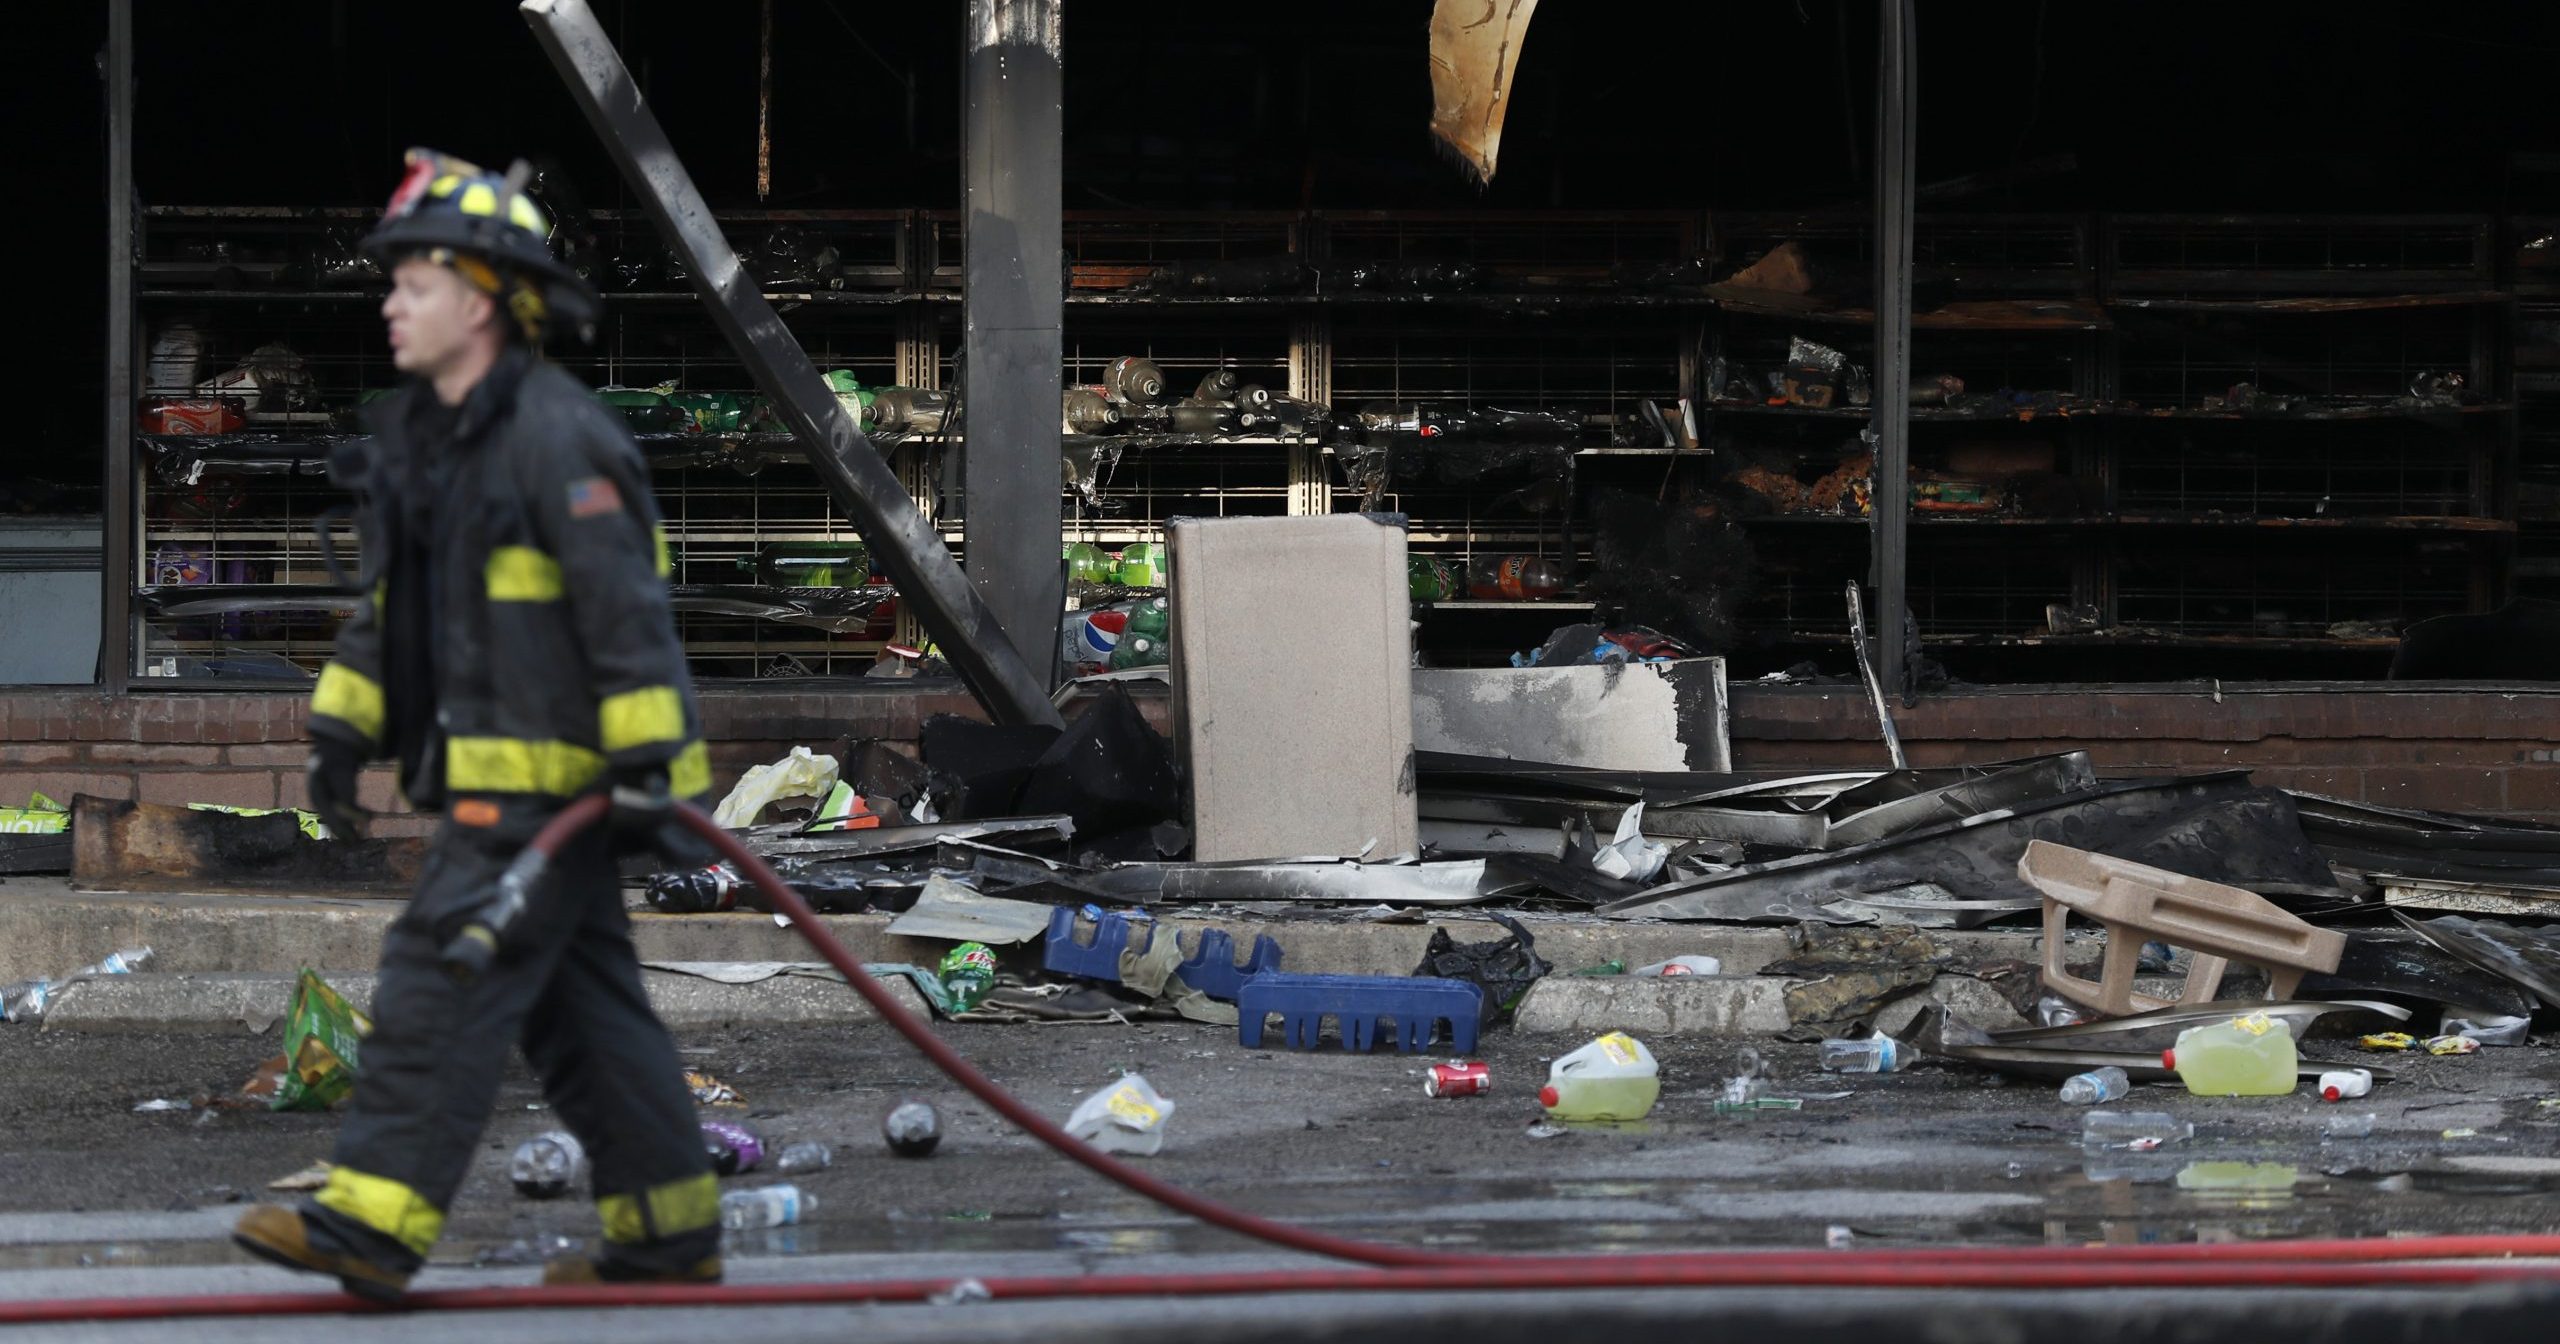 A member of the St. Louis Fire Department wraps up his work outside a vandalized and burned convenience store on Tuesday, June 2, 2020, in St. Louis. On Monday night people were seen removing items from the store before the building went up in flames after a large peaceful protest of the death of George Floyd had ended.